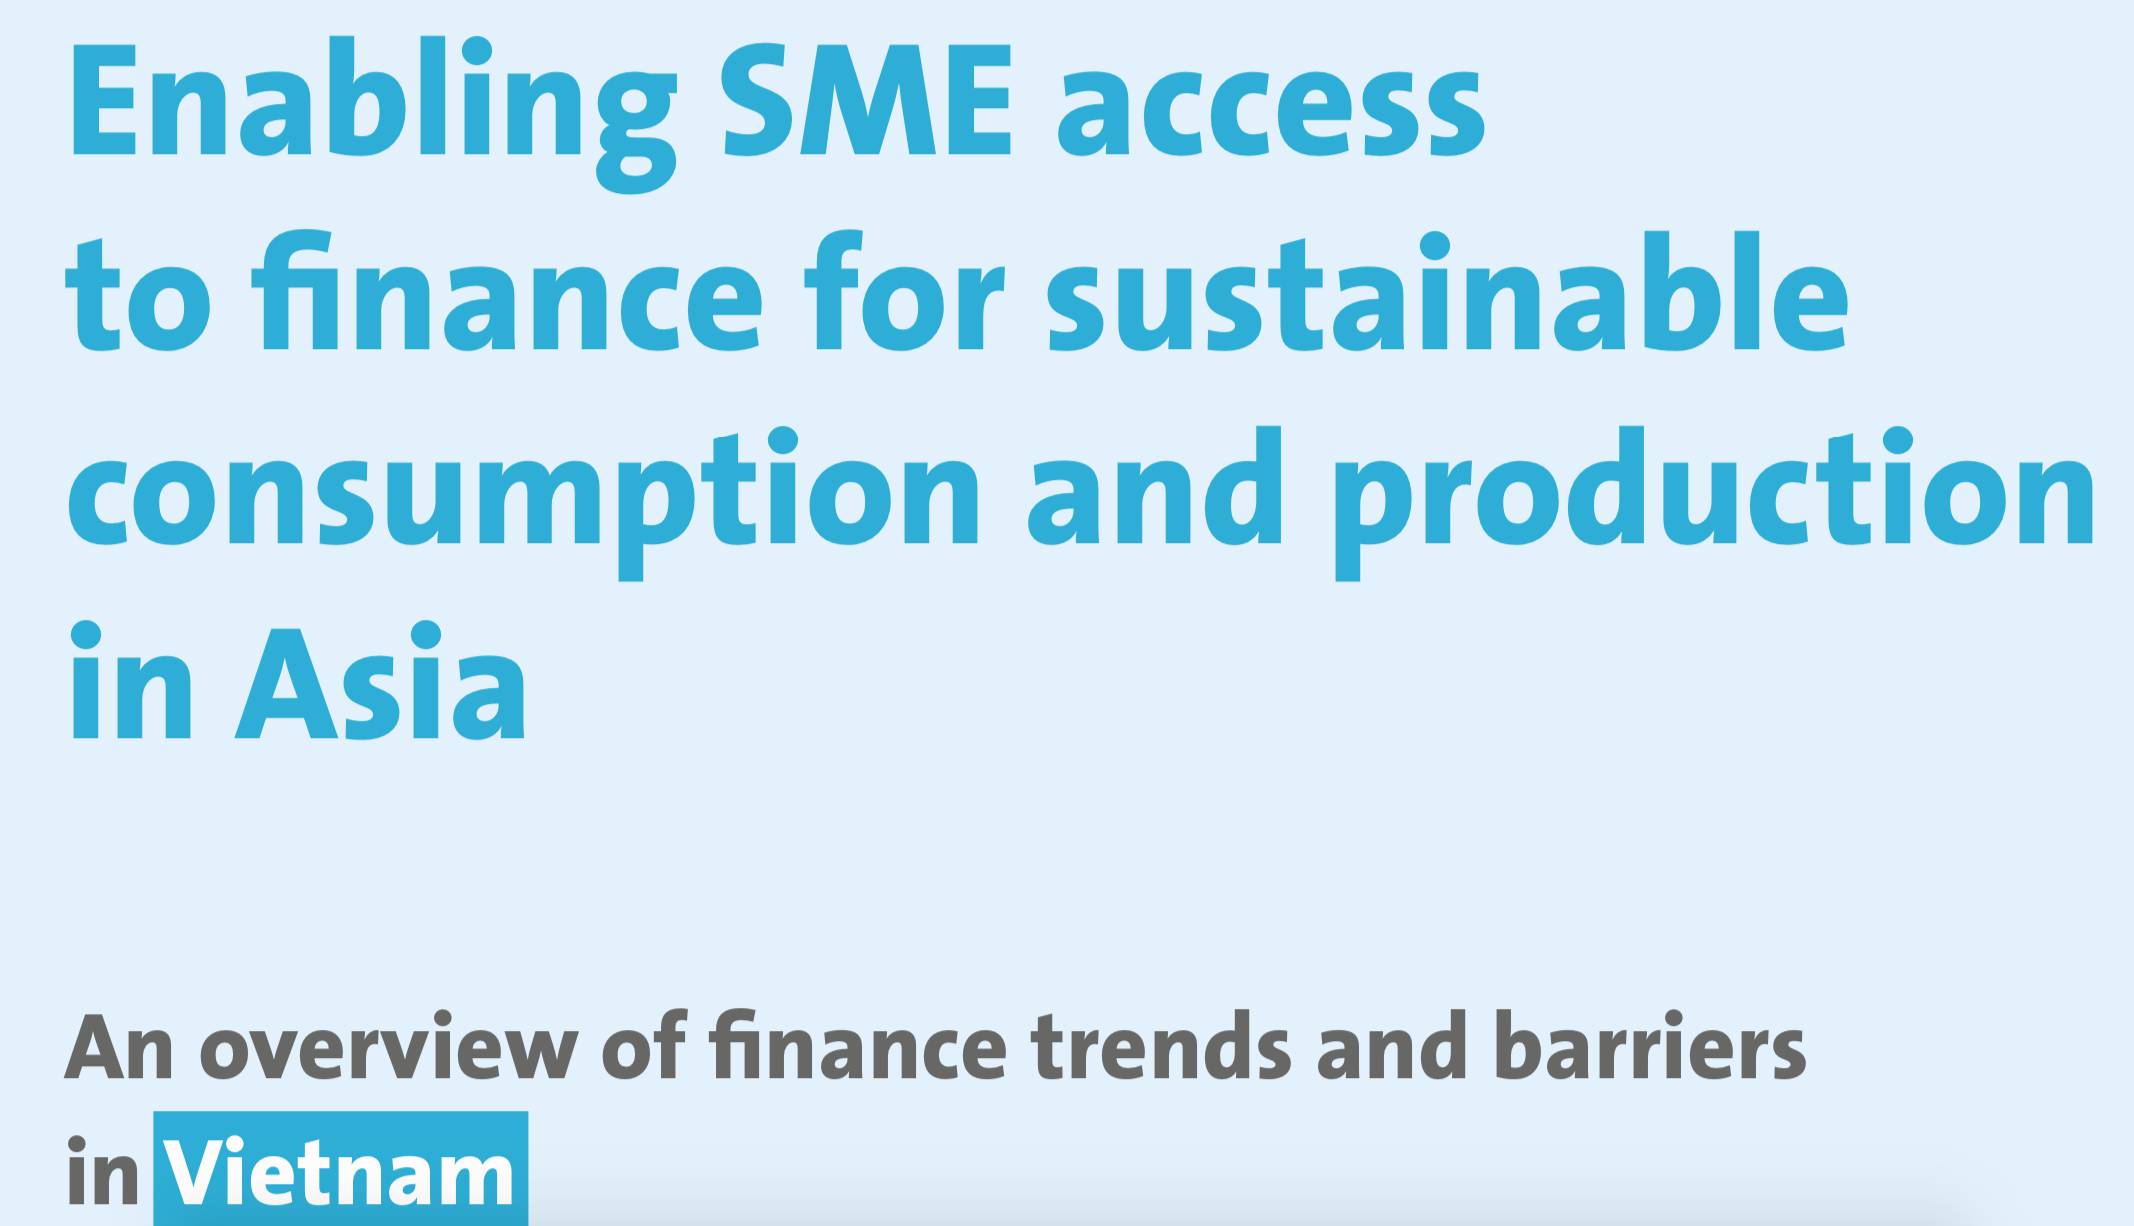 Enabling SME access to finance for sustainable consumption and production in Asia: An overview of finance trends and barriers in Vietnam